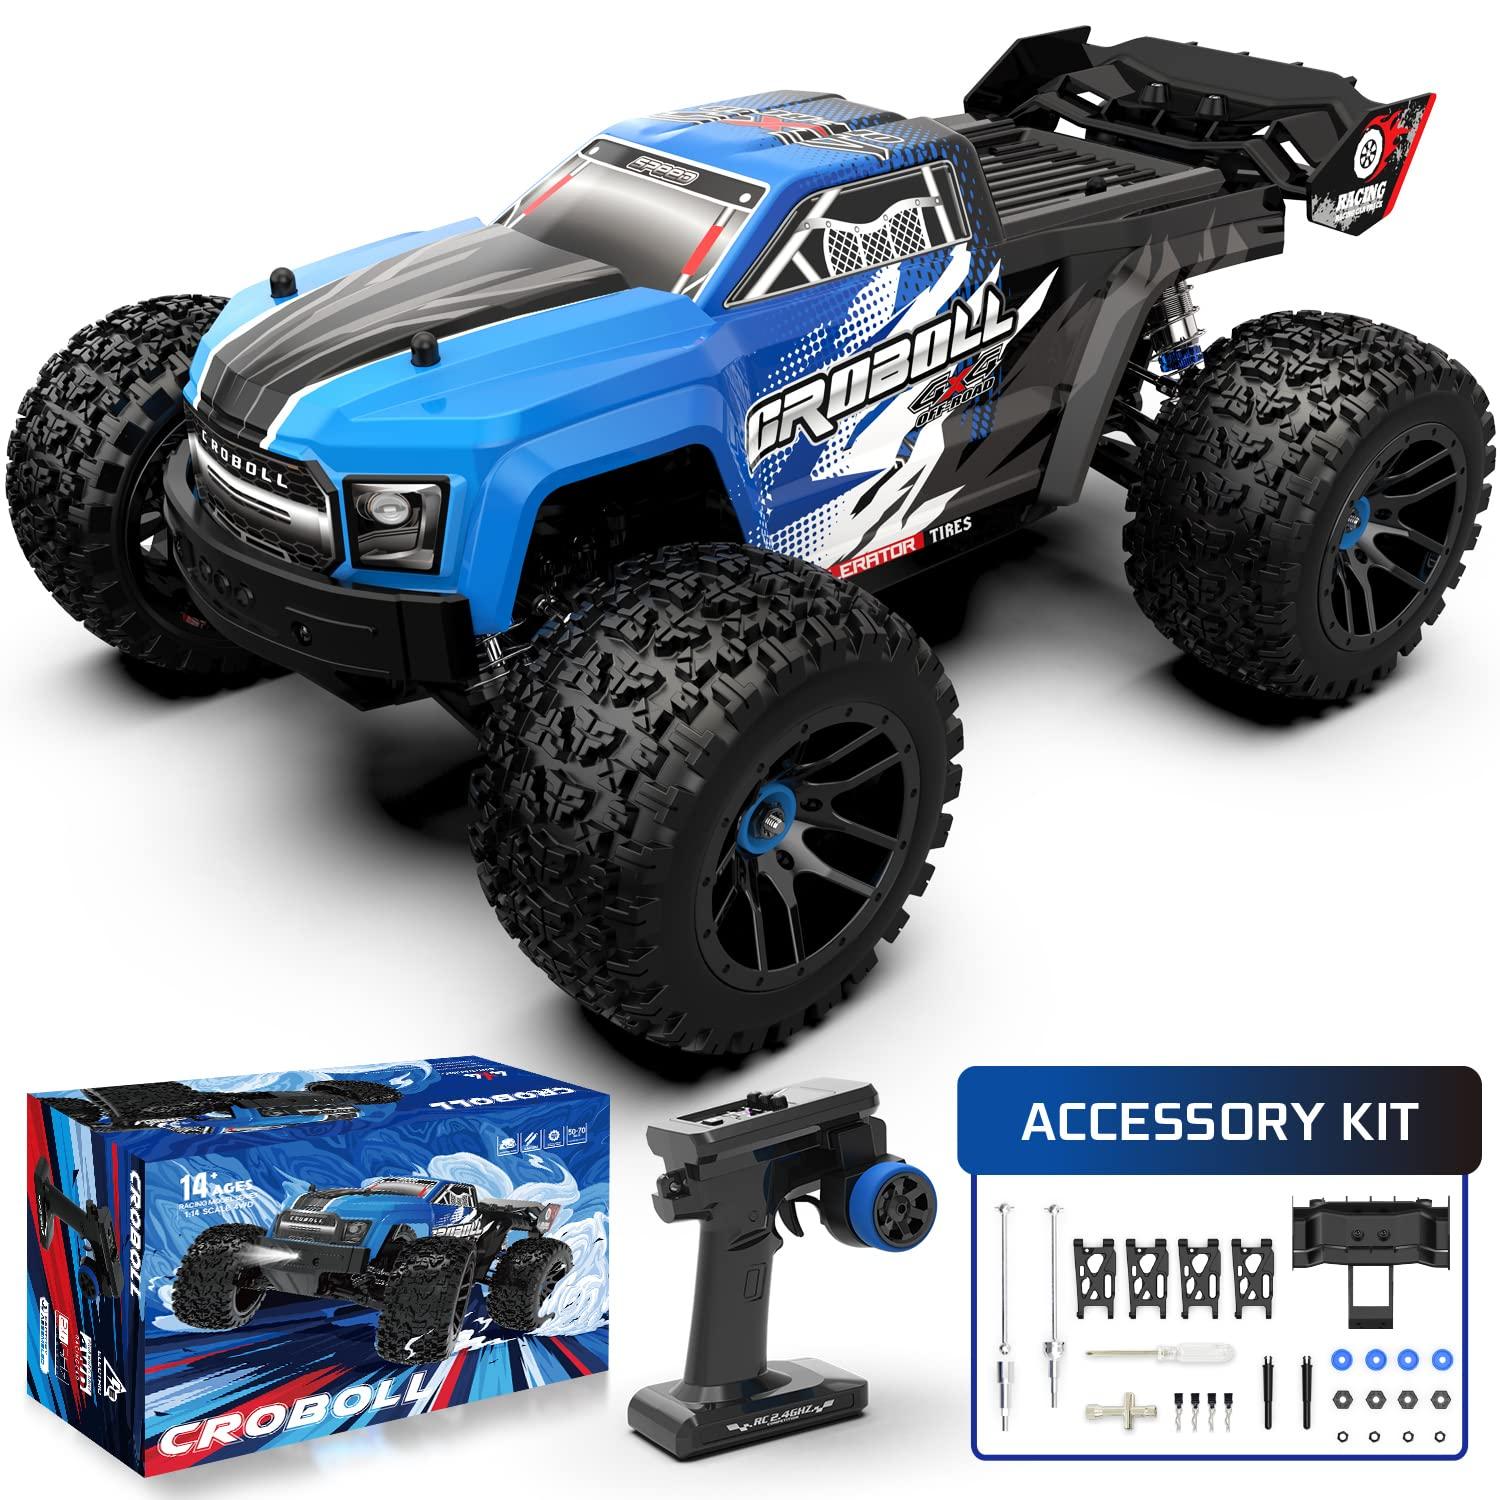 Large Electric Rc Cars: It's worth the extra cost to invest in large electric RC cars for true enthusiasts.